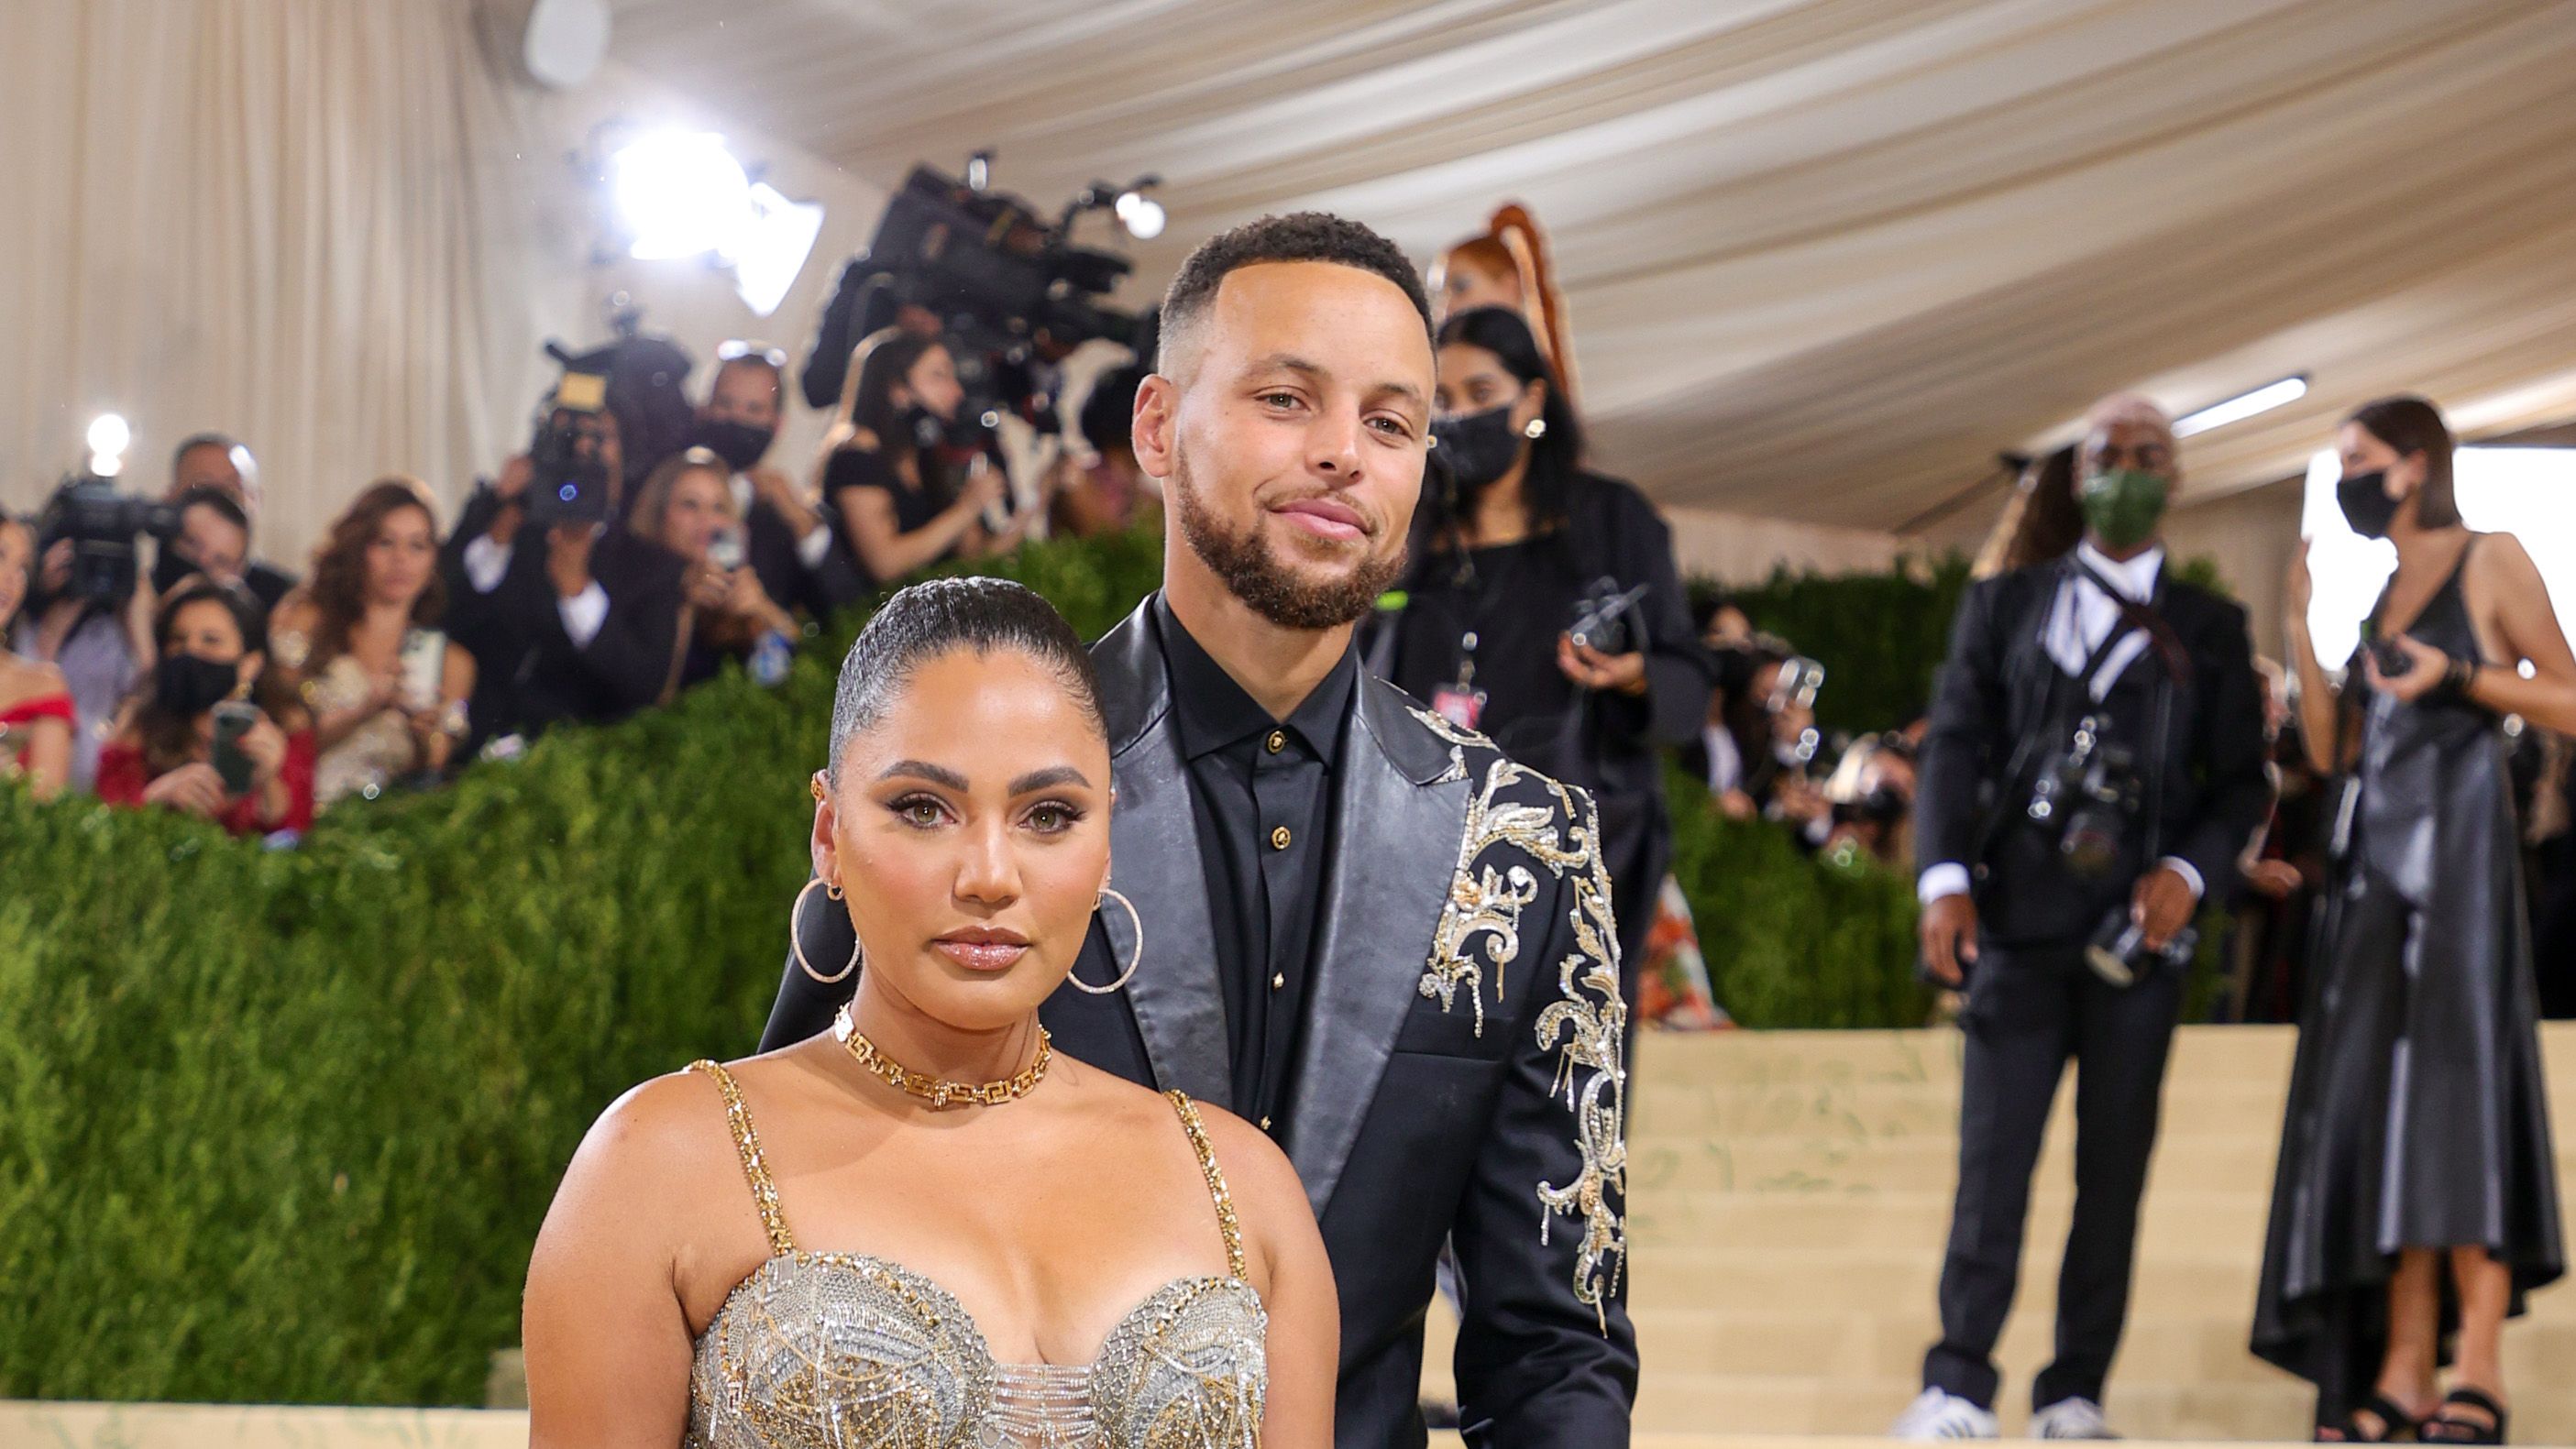 Steph Curry Opens Up About Having More Kids With Wife Ayesha Curry